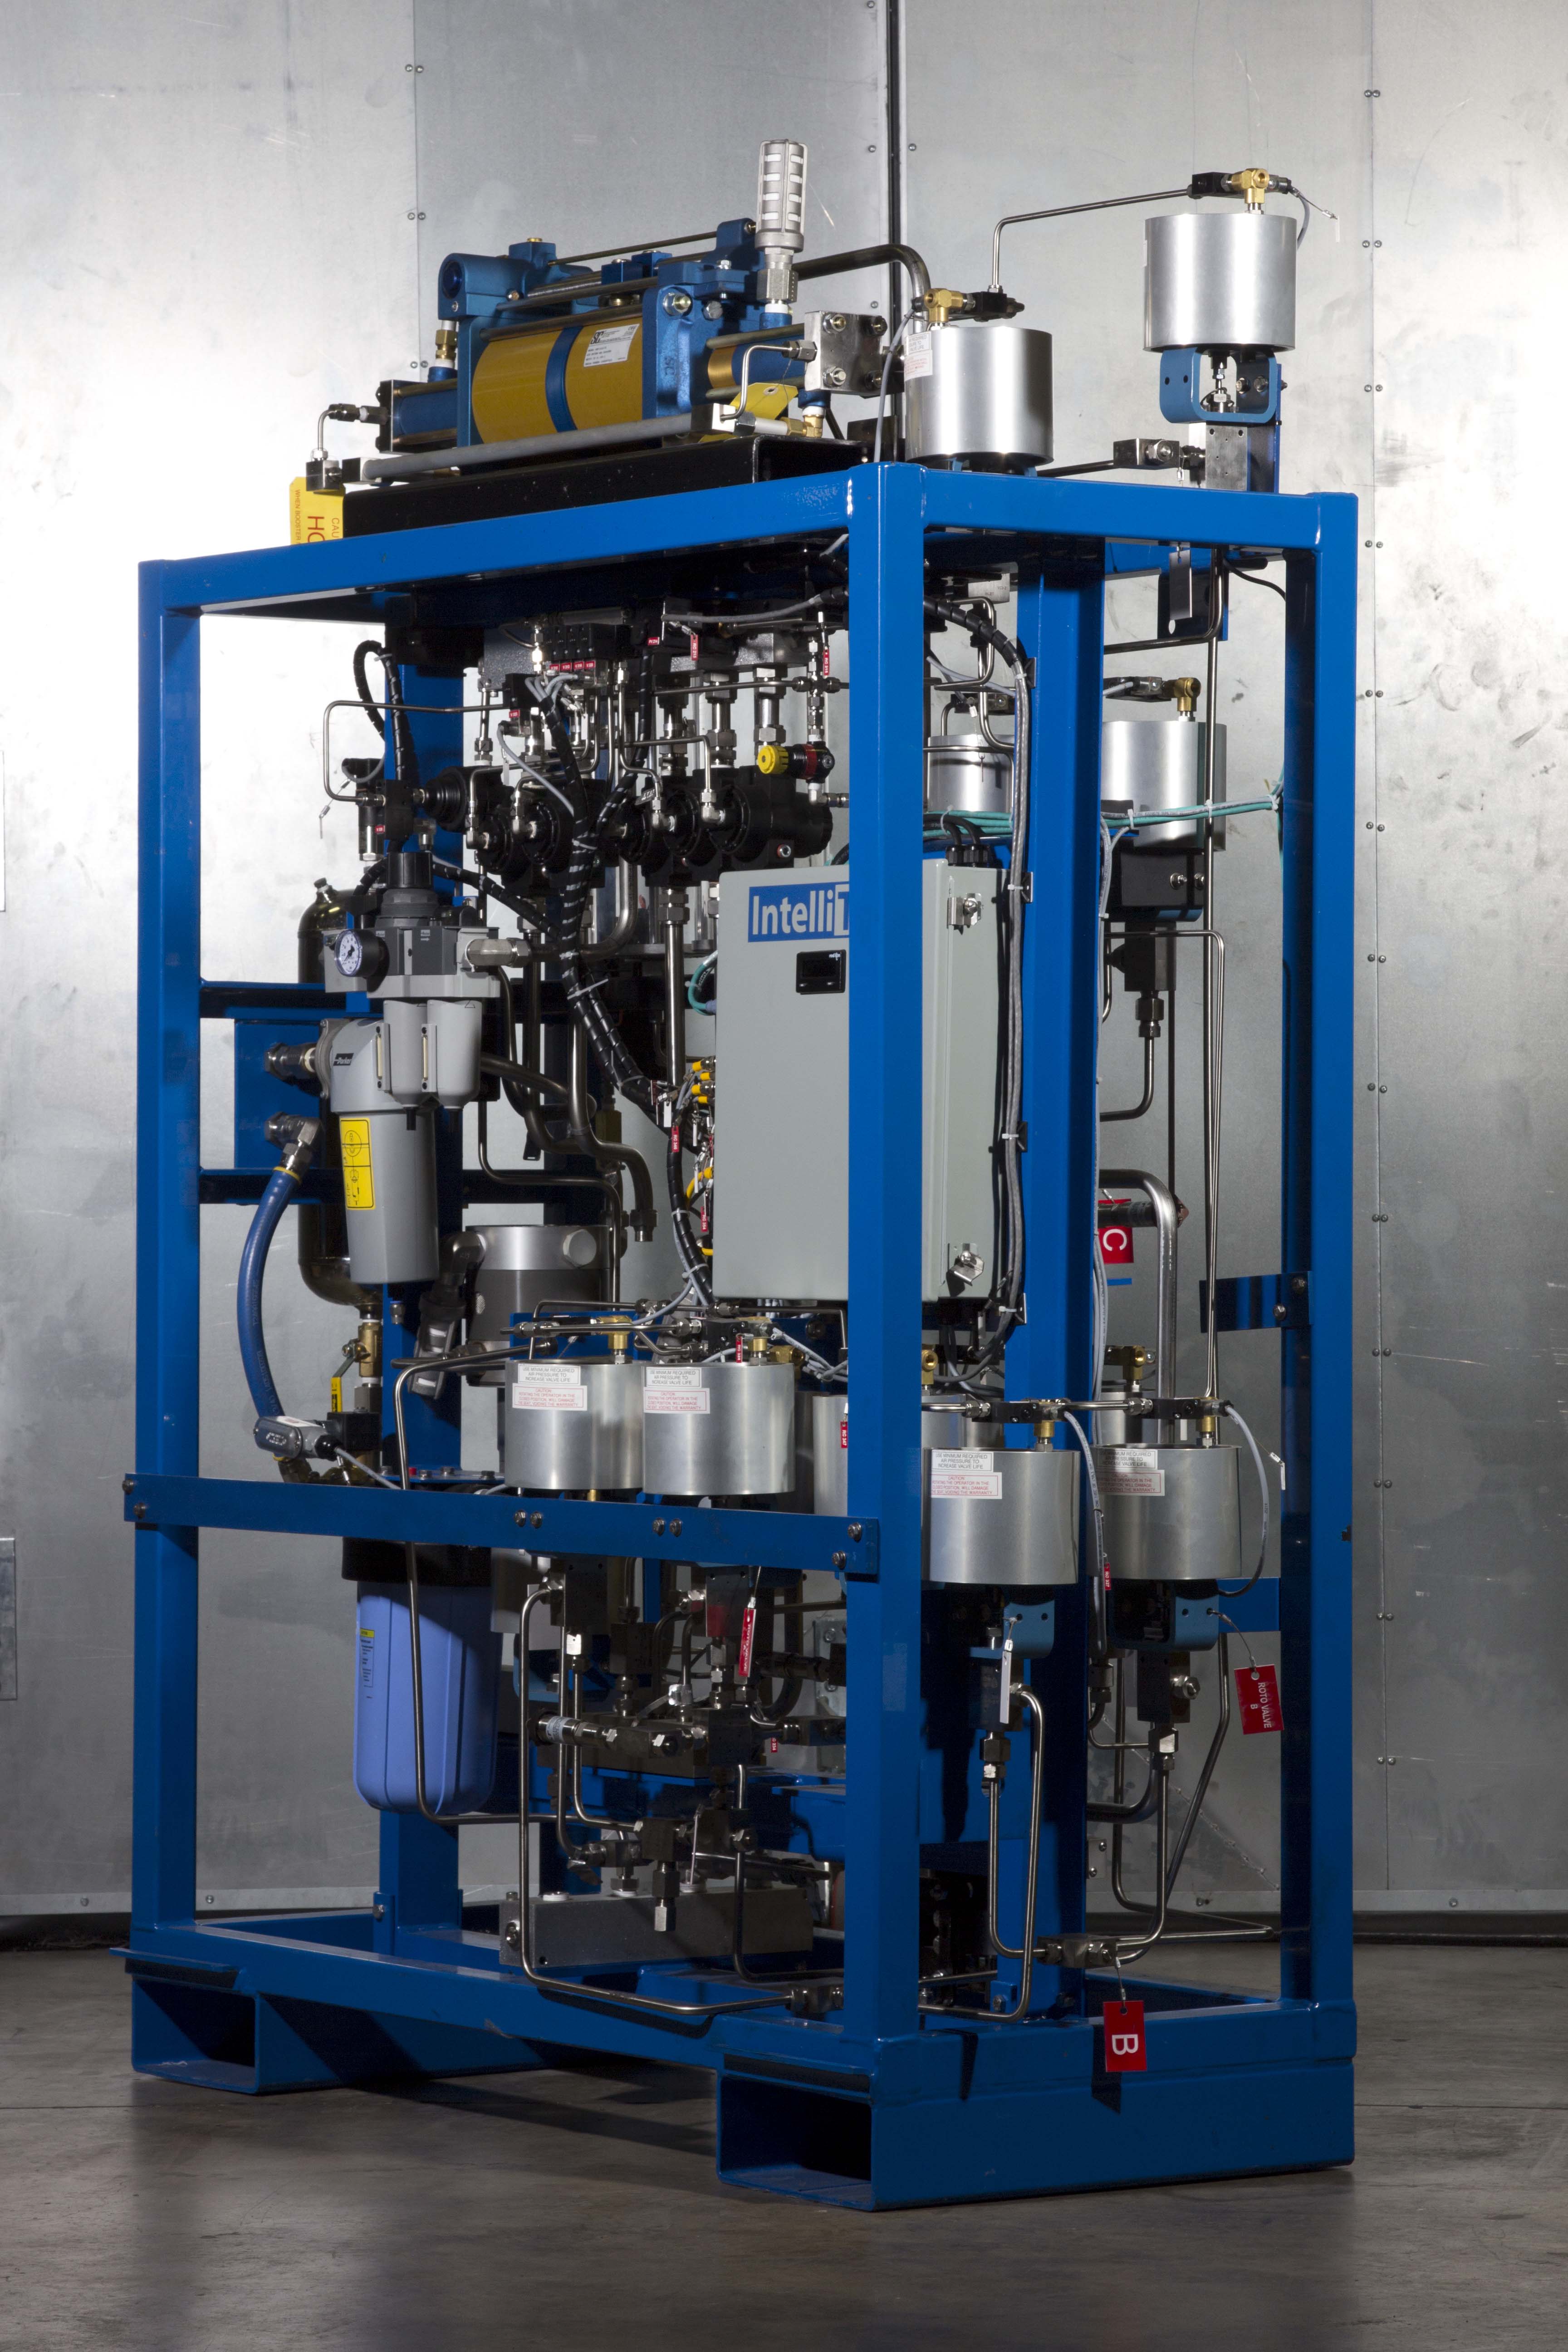 IntelliTest system available for OEM's test chamber without external cabinet